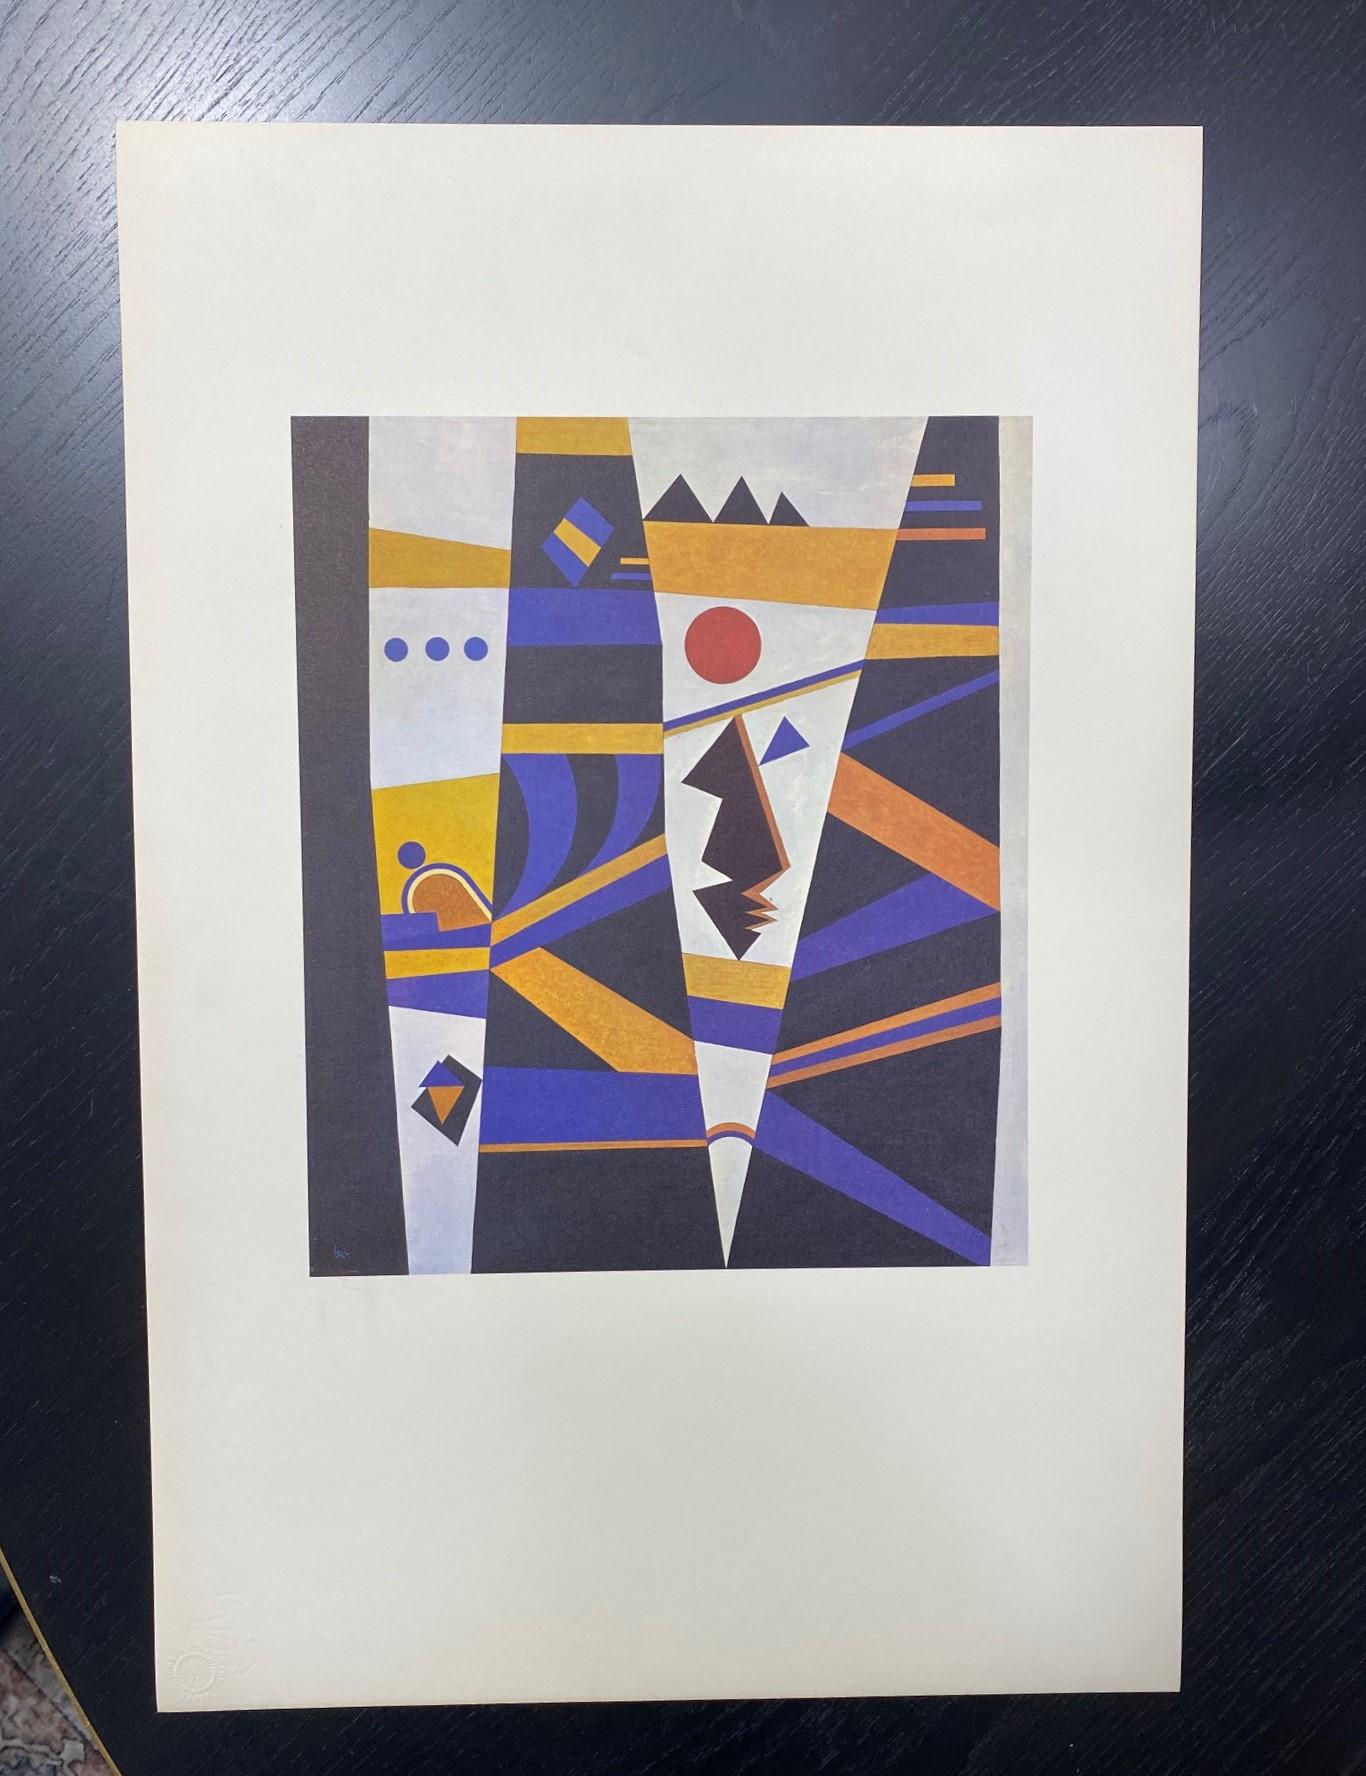 A beautiful limited edition abstract Expressionism offset lithograph of the Russian painter and art theorist Wassily Kandinsky's 